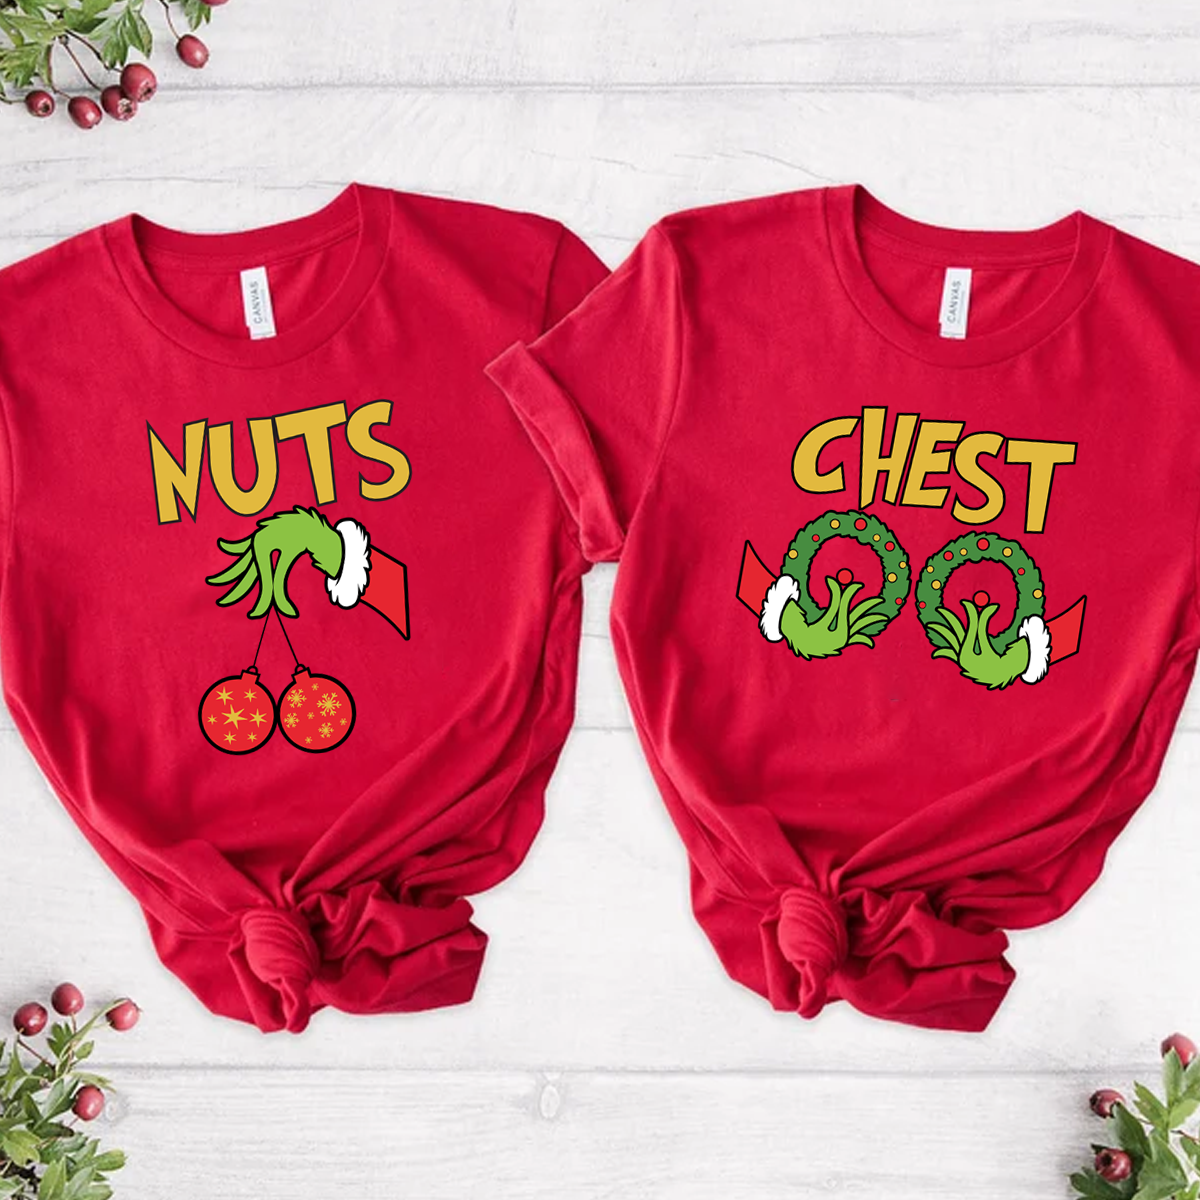 Chest Nuts Couples Christmas T-Shirt